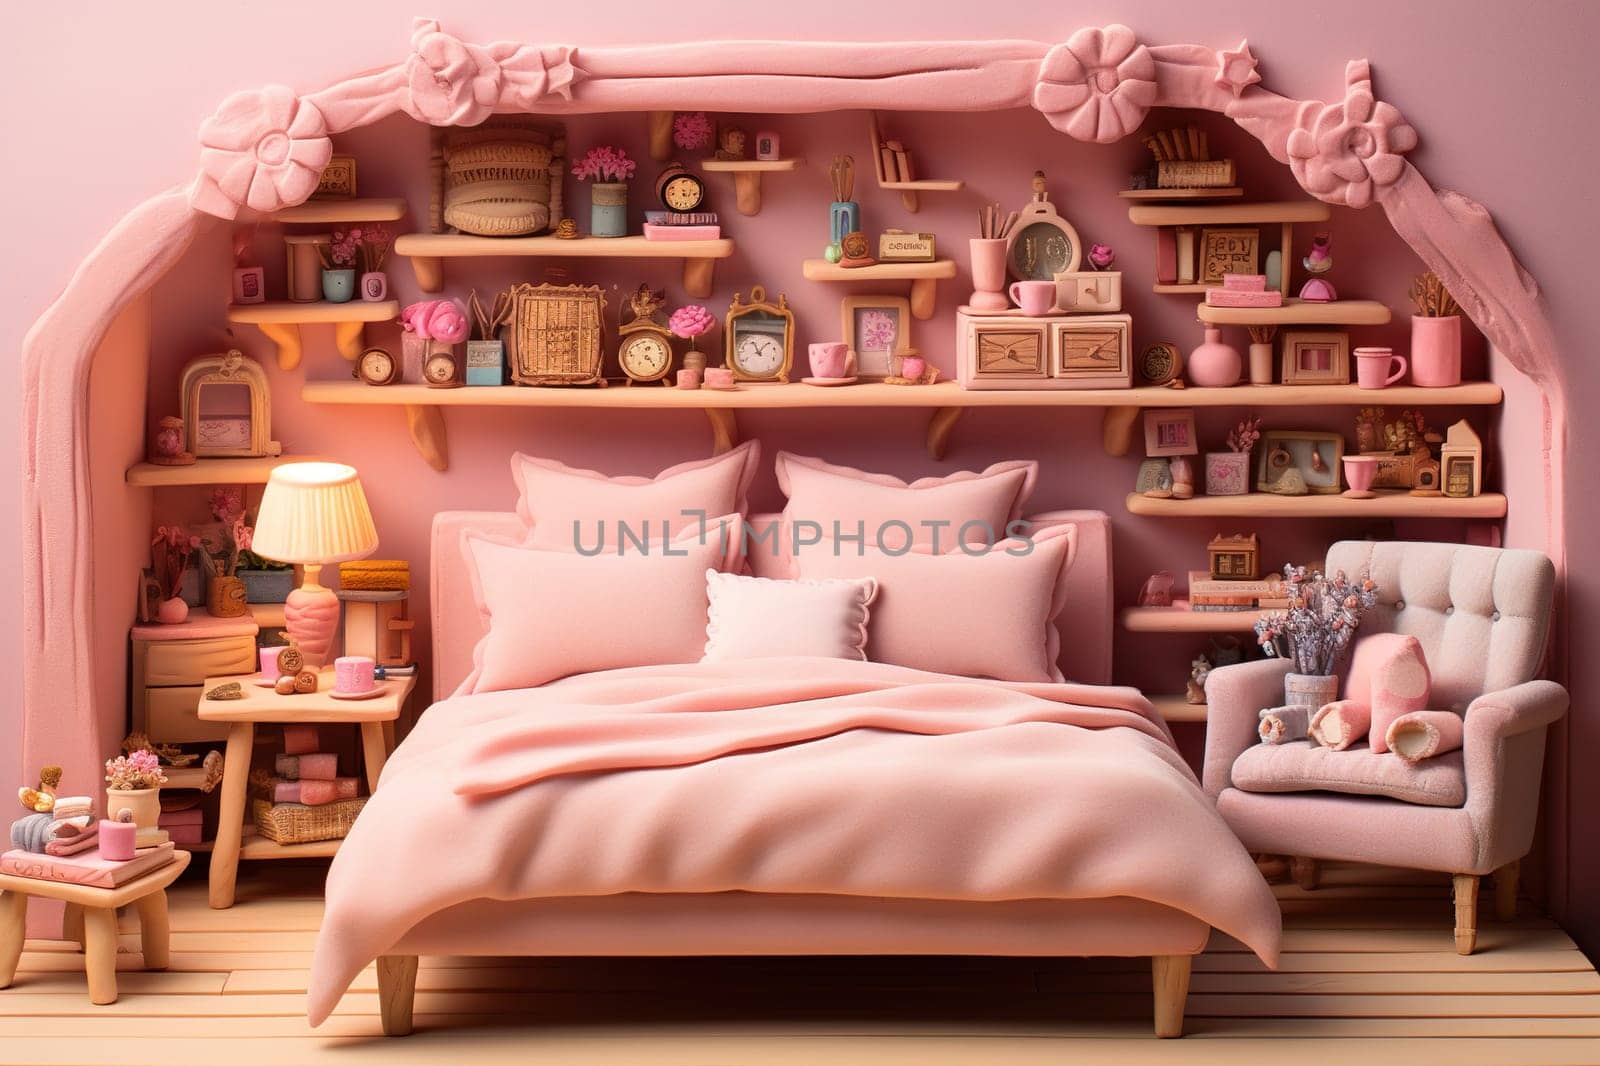 Cartoon 3D interior of a room in pink shades with a large bed.